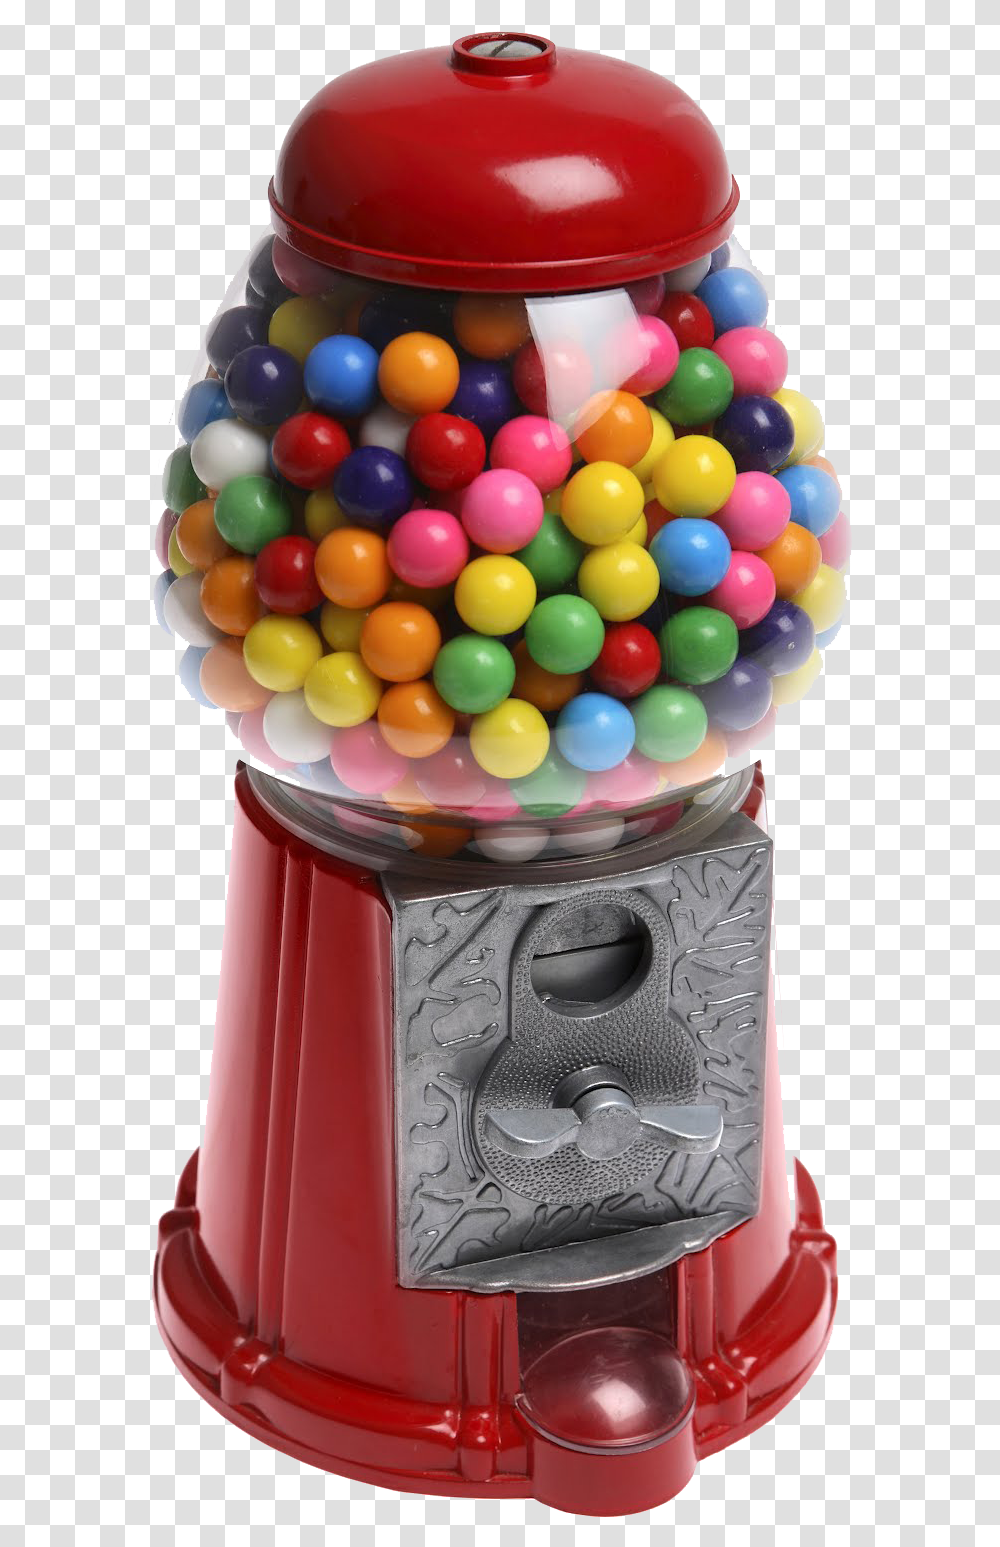 Gum Images Machine Of Bubble Gum, Sphere, Ball, Food, Sweets Transparent Png